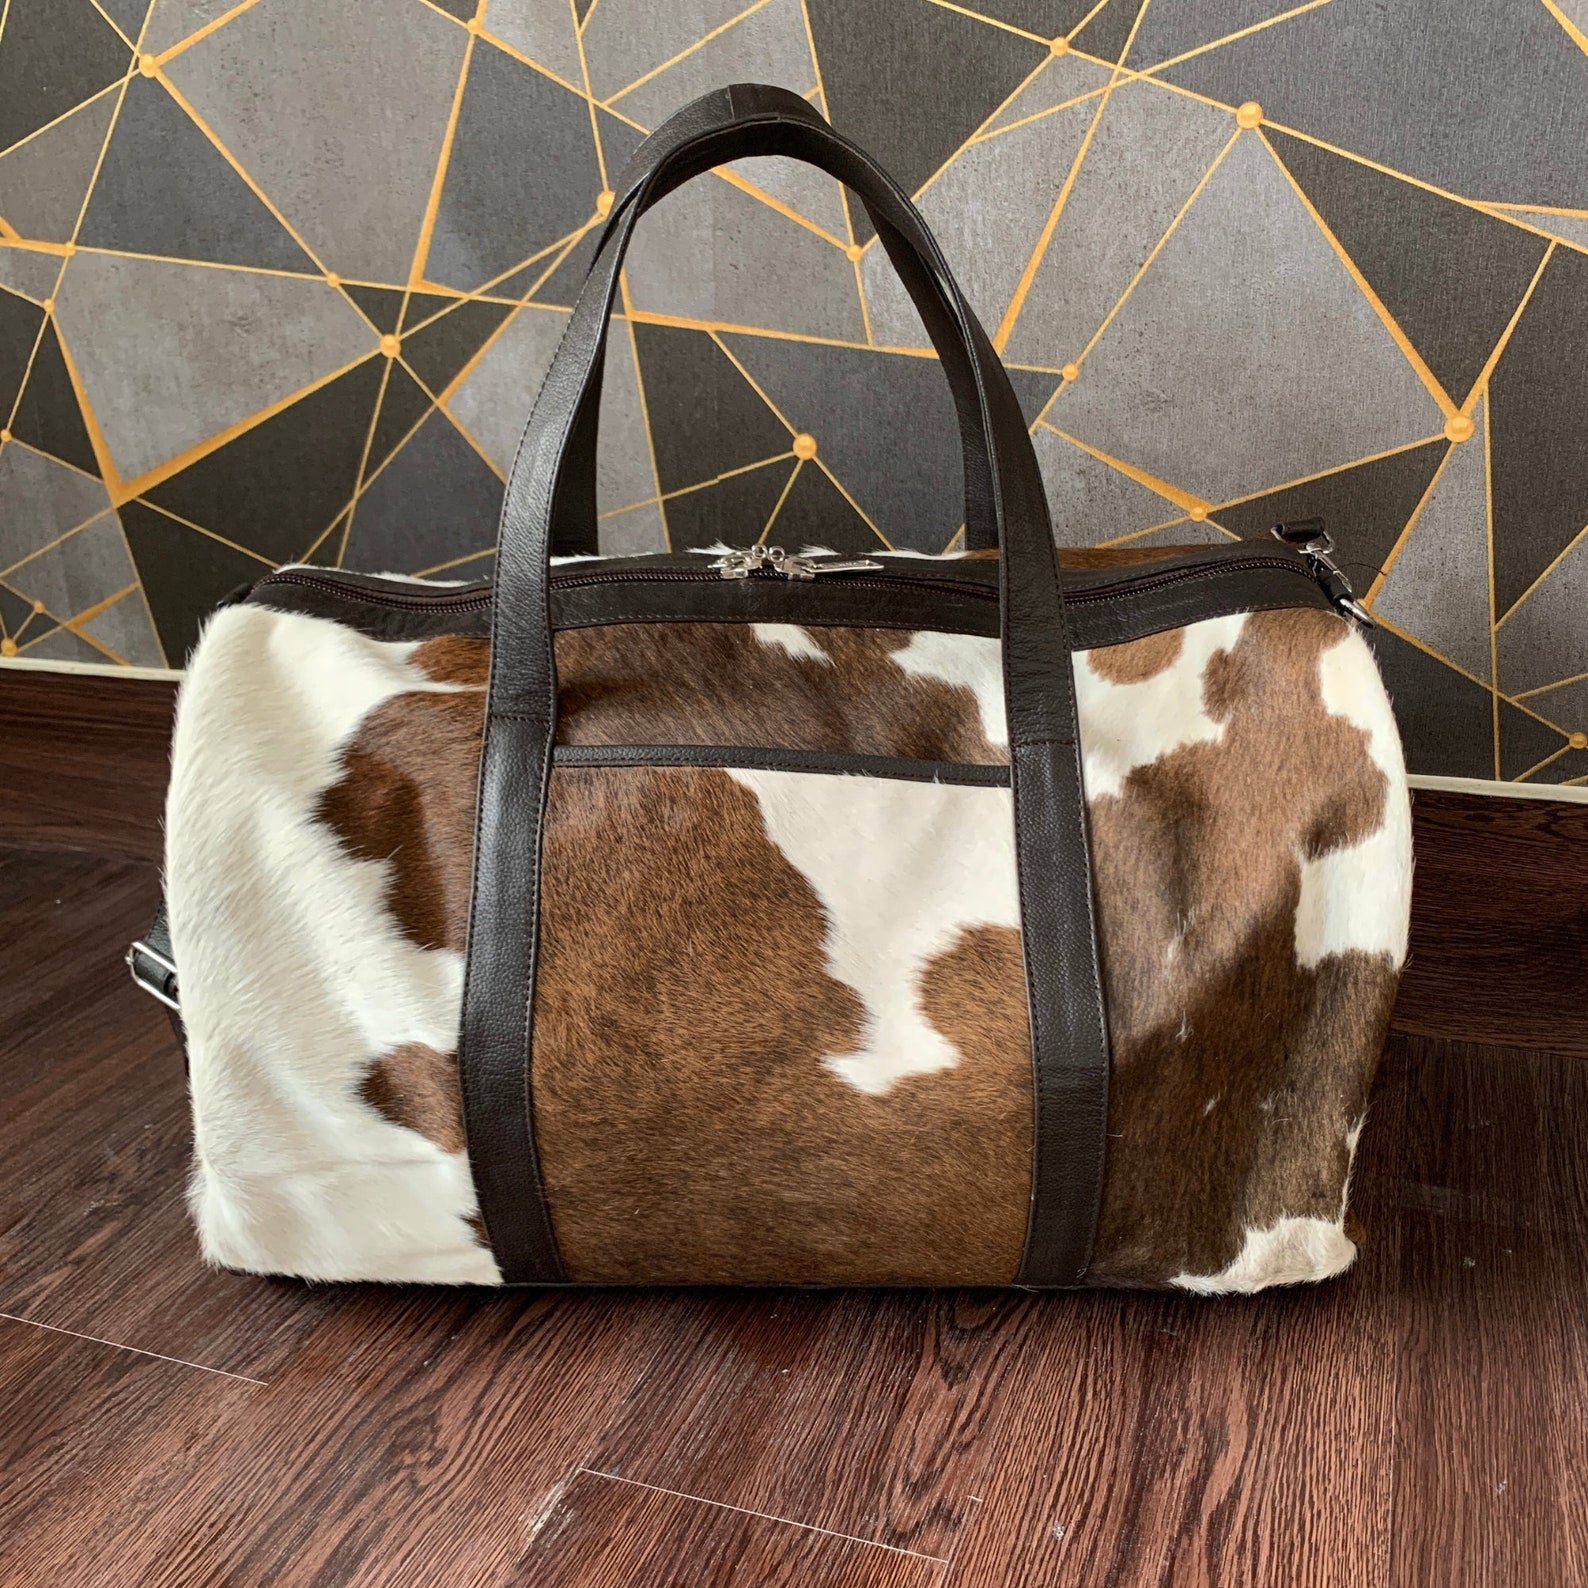  Stay organized on the move with our cowhide duffle bag. Essential gear.